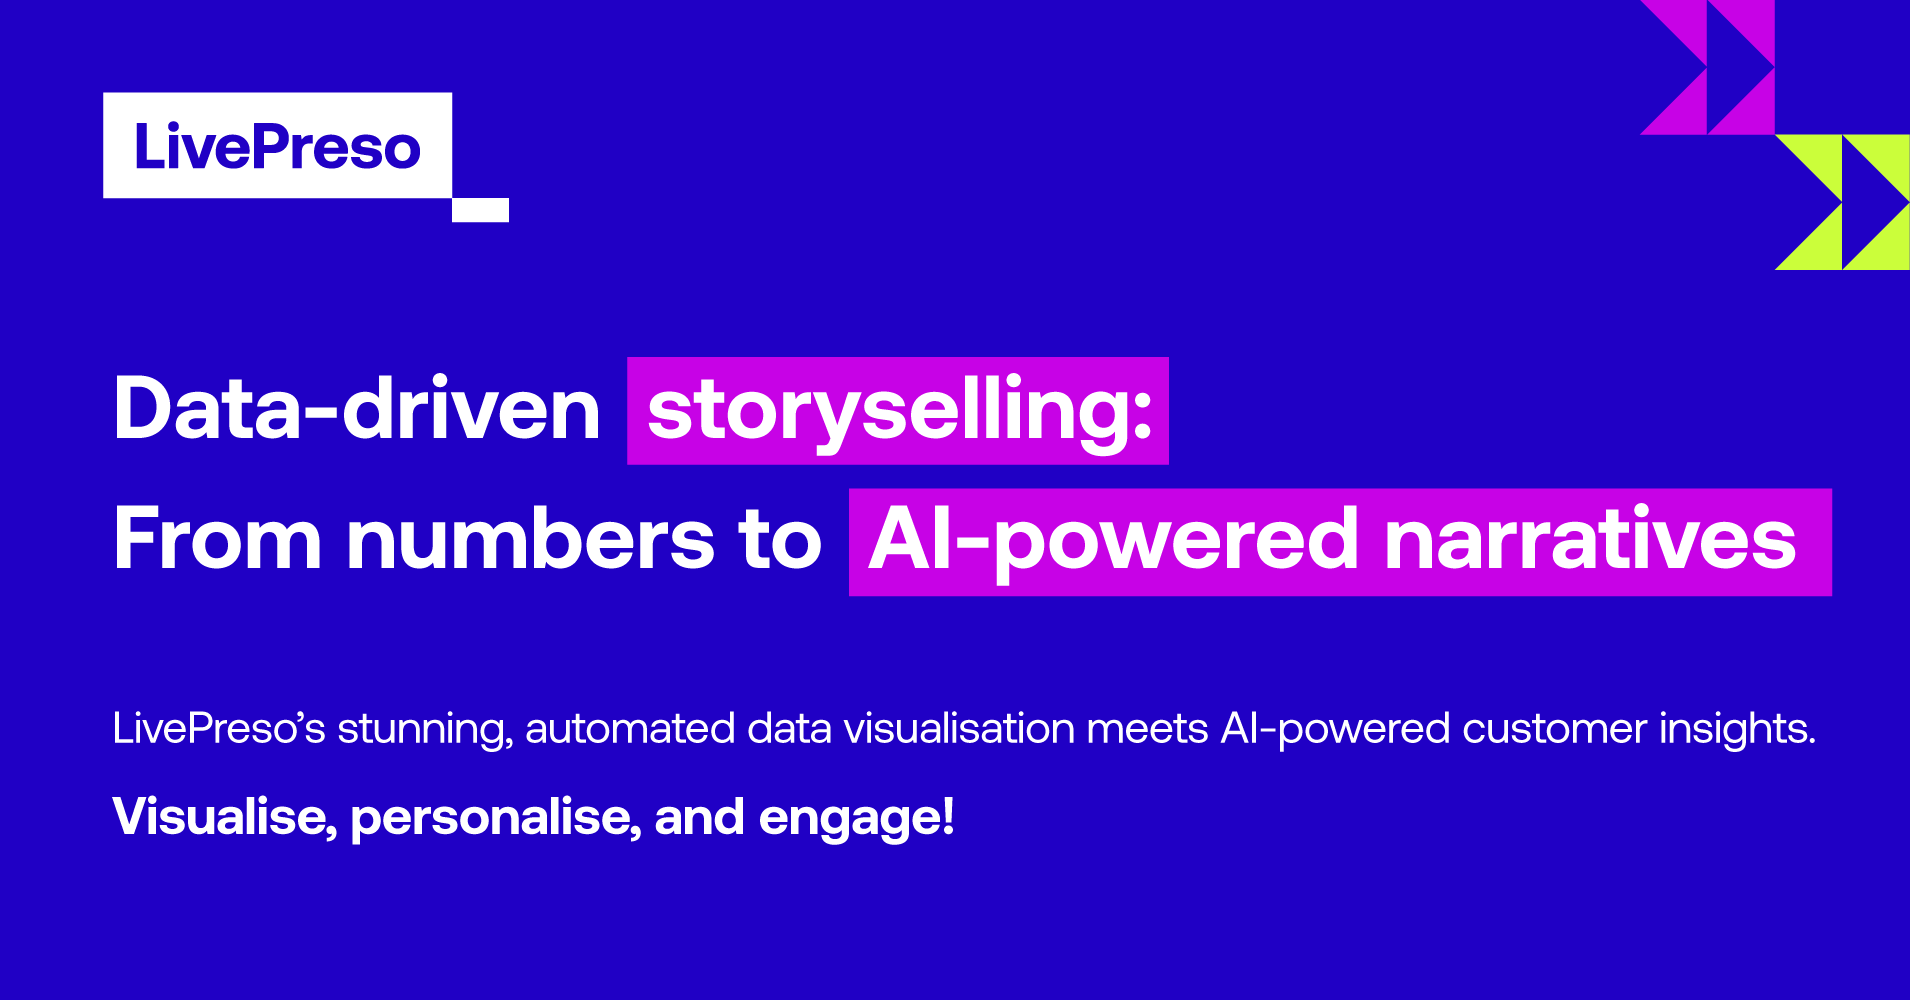 Data-driven storyselling: From numbers to AI-powered narratives